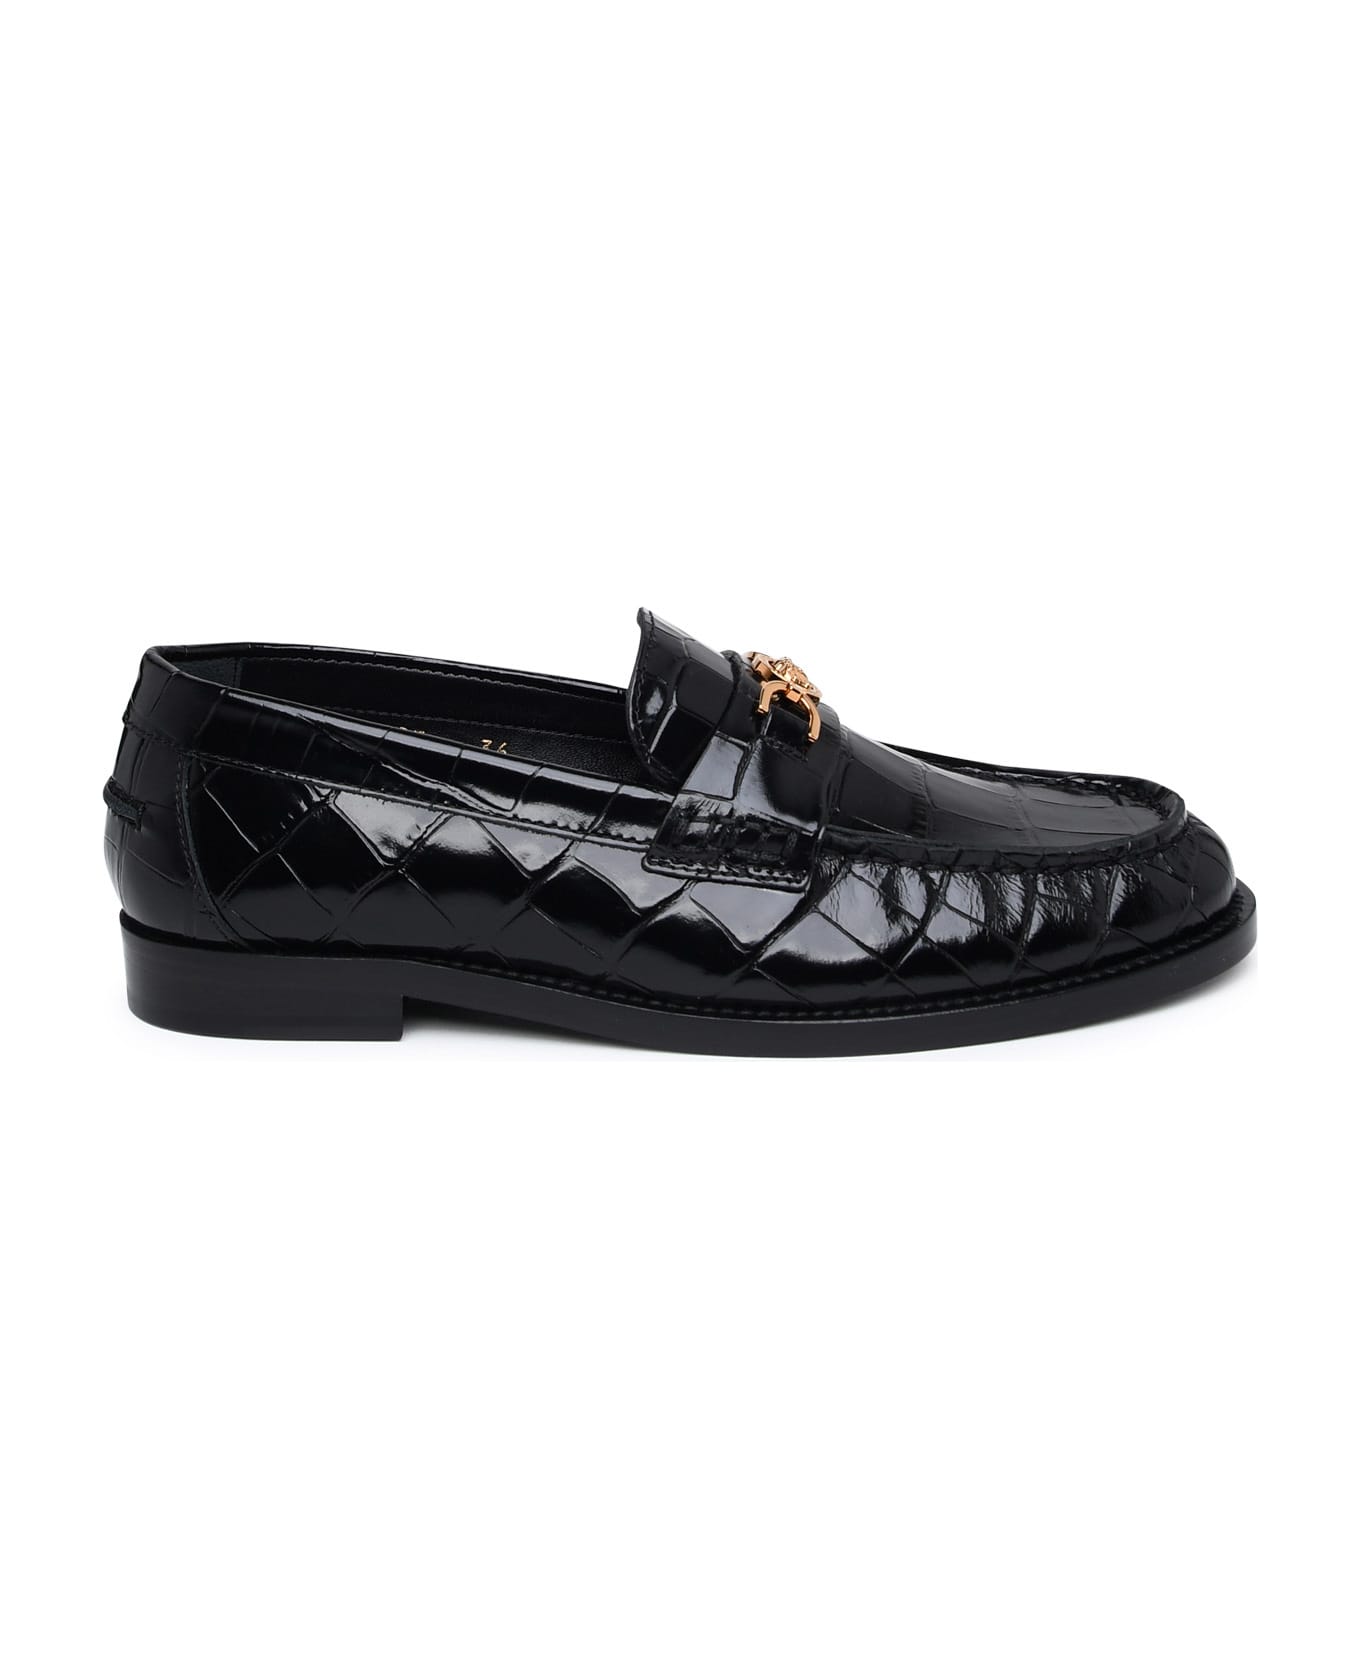 Versace Black Leather Loafers - Black